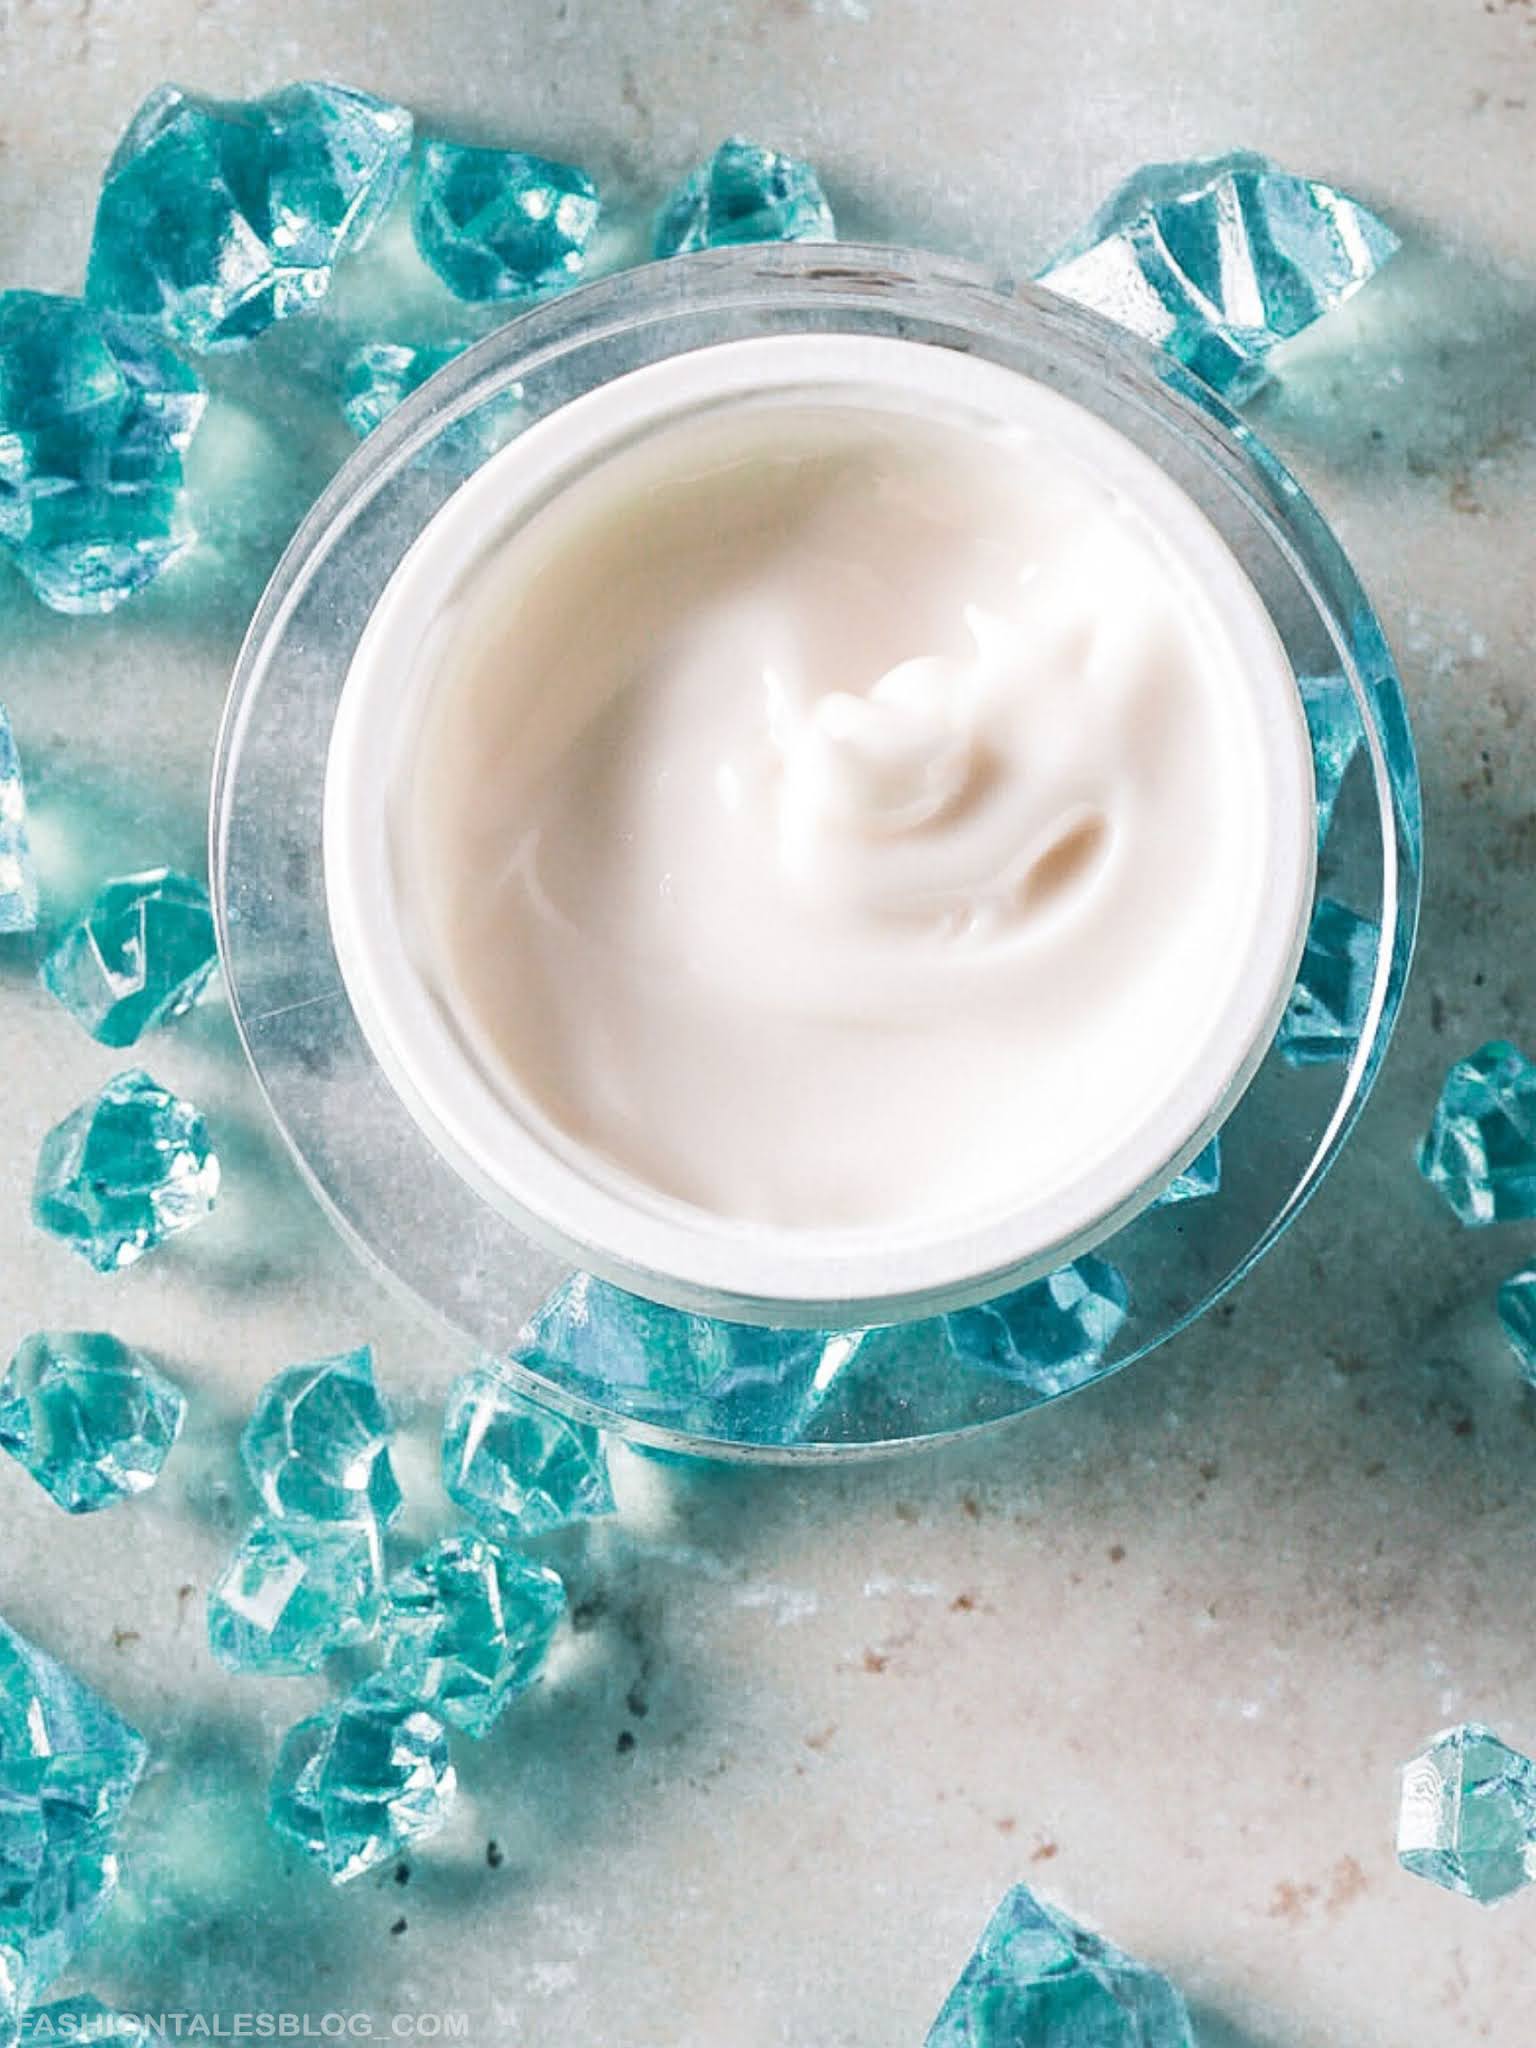 BEAUTY CREAM WITH BLUE AND WHITE